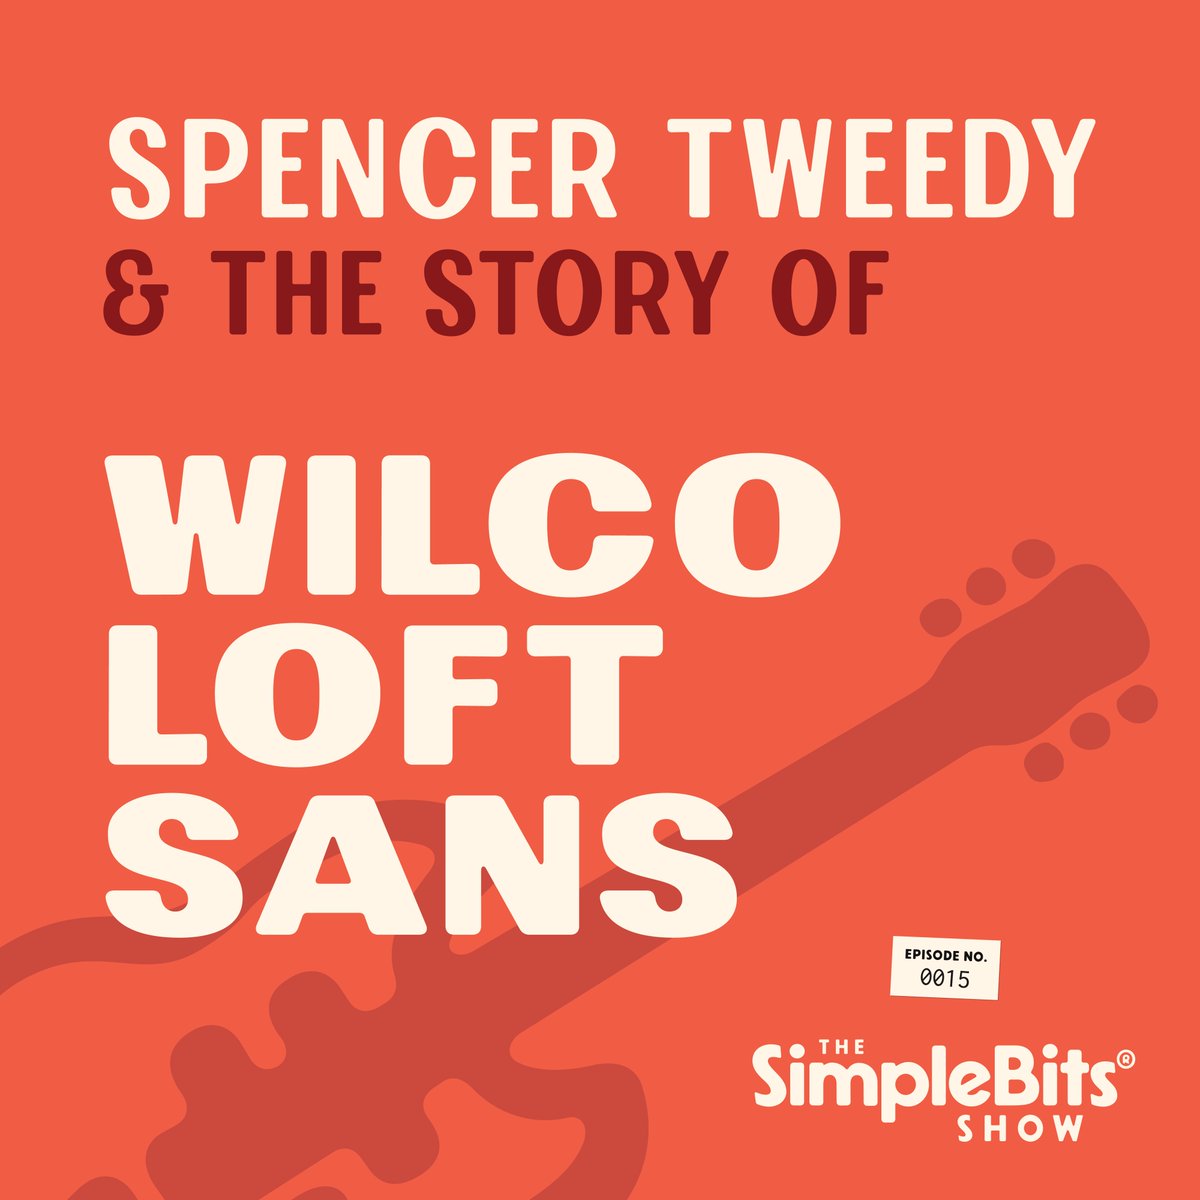 Yesterday we released Wilco Loft Sans—our collaboration with the amazing @wilco. Today we revive the podcast! I chat with drummer, author & creative force @Spencertweedy who spearheaded the font project. I had a blast talking drums, fonts, and creativity.

show.simplebits.com/episodes/spenc…